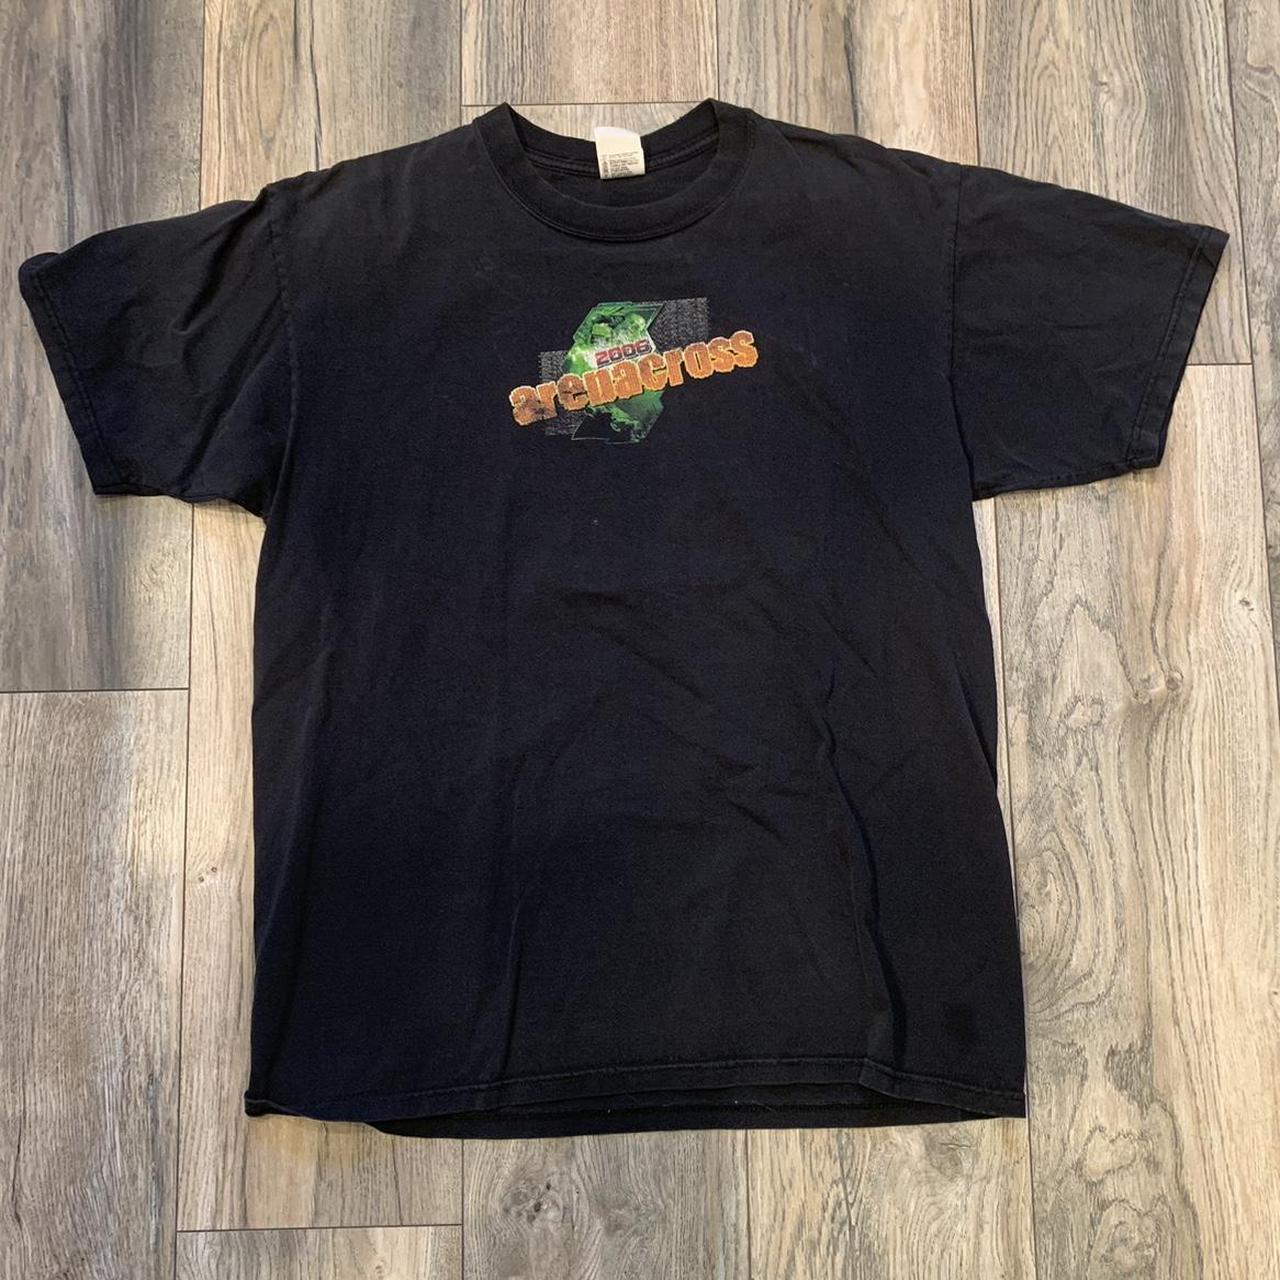 Vintage Racing Tshirt Nice fade on this one, size... - Depop